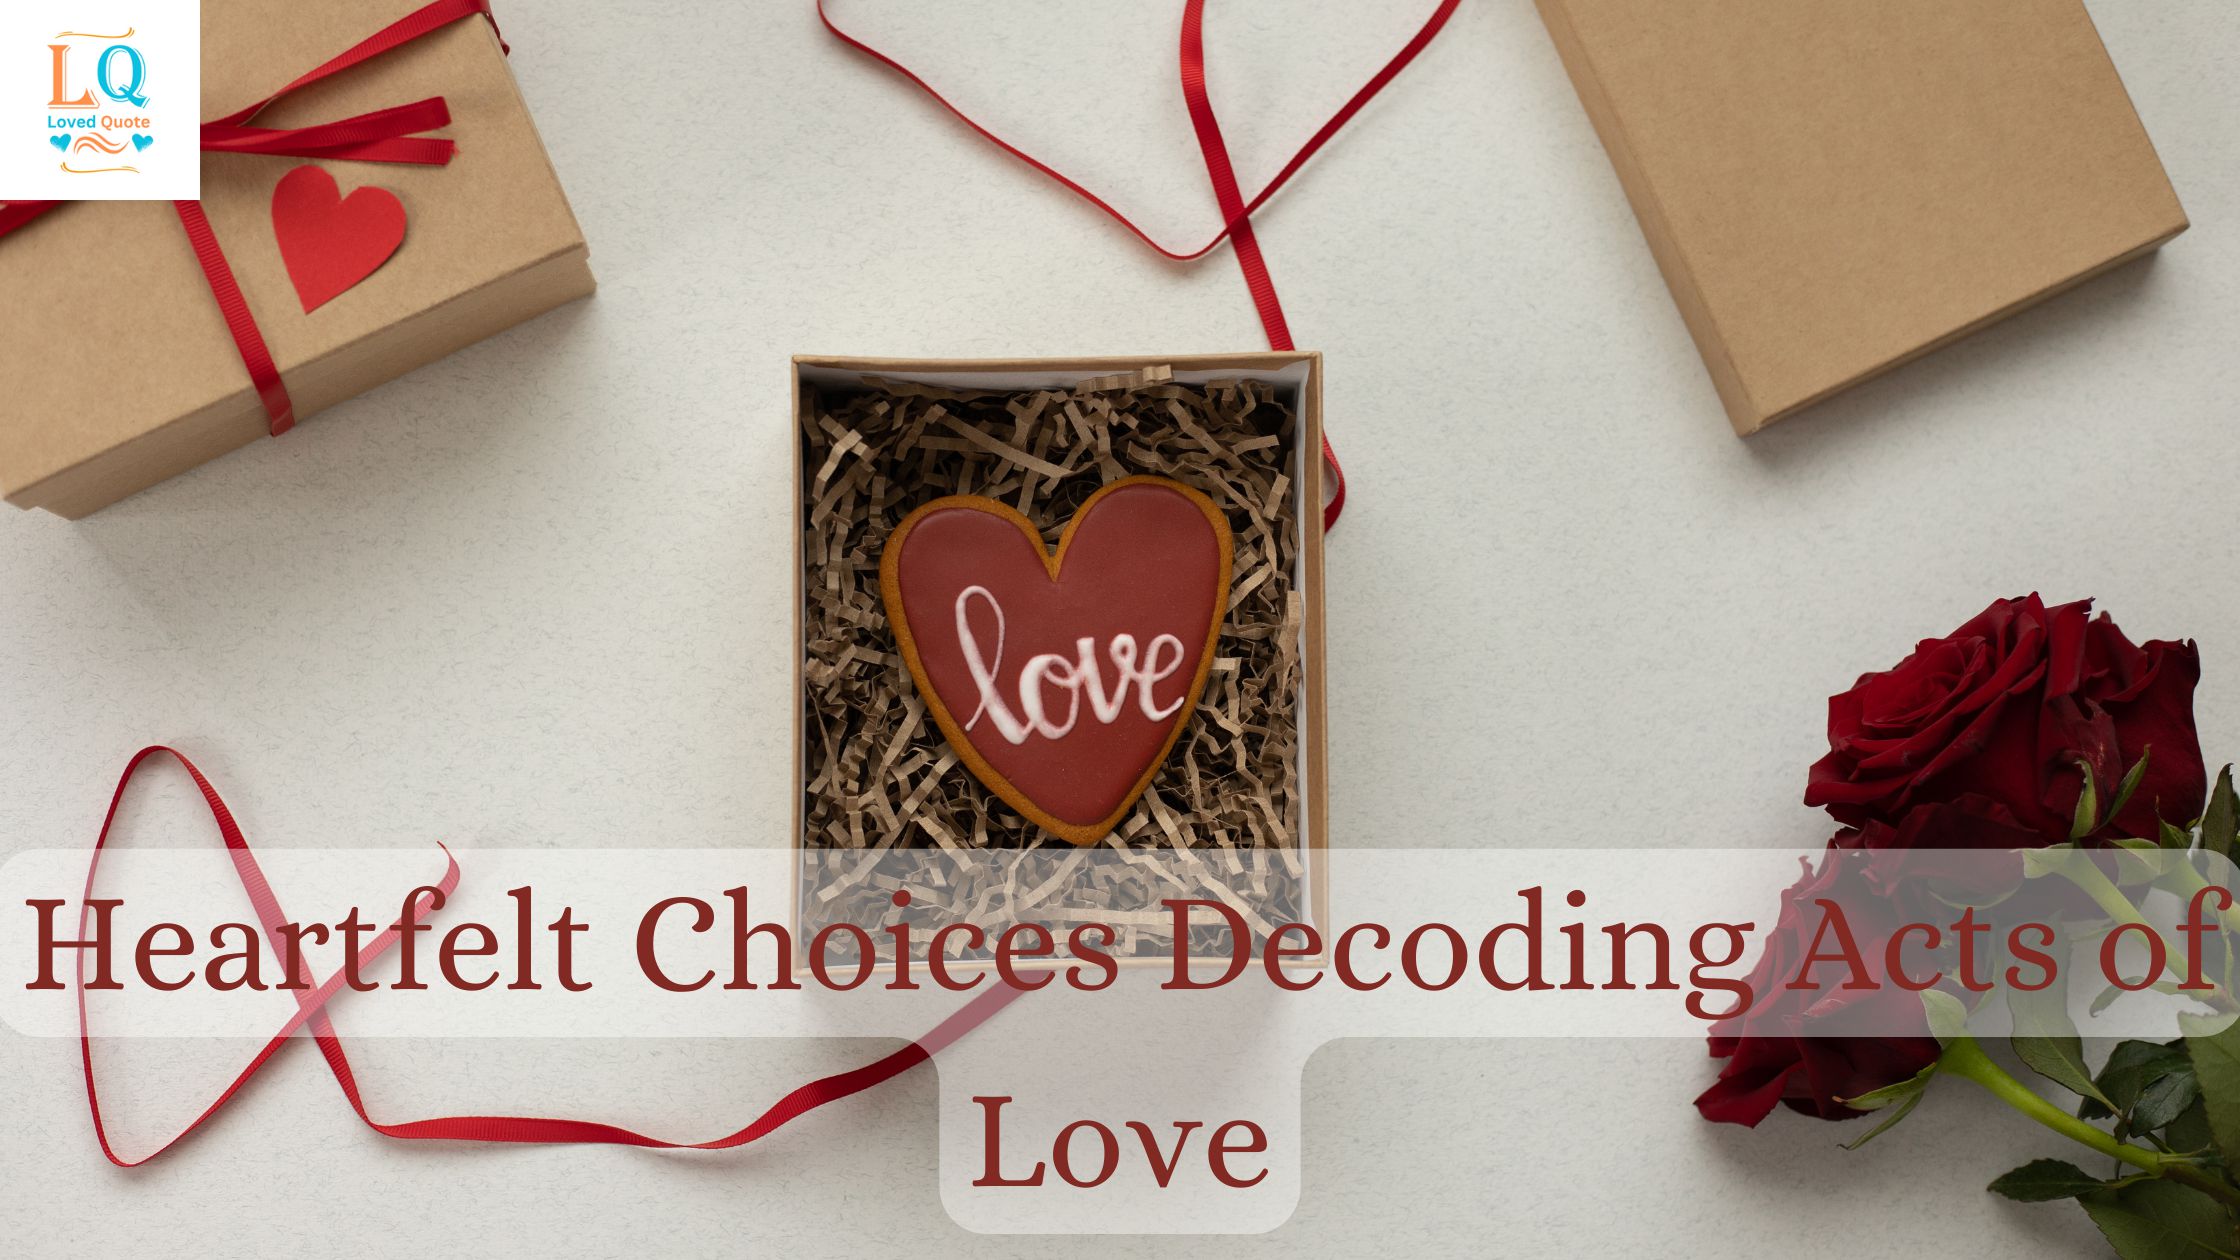 Heartfelt Choices Decoding Acts of Love